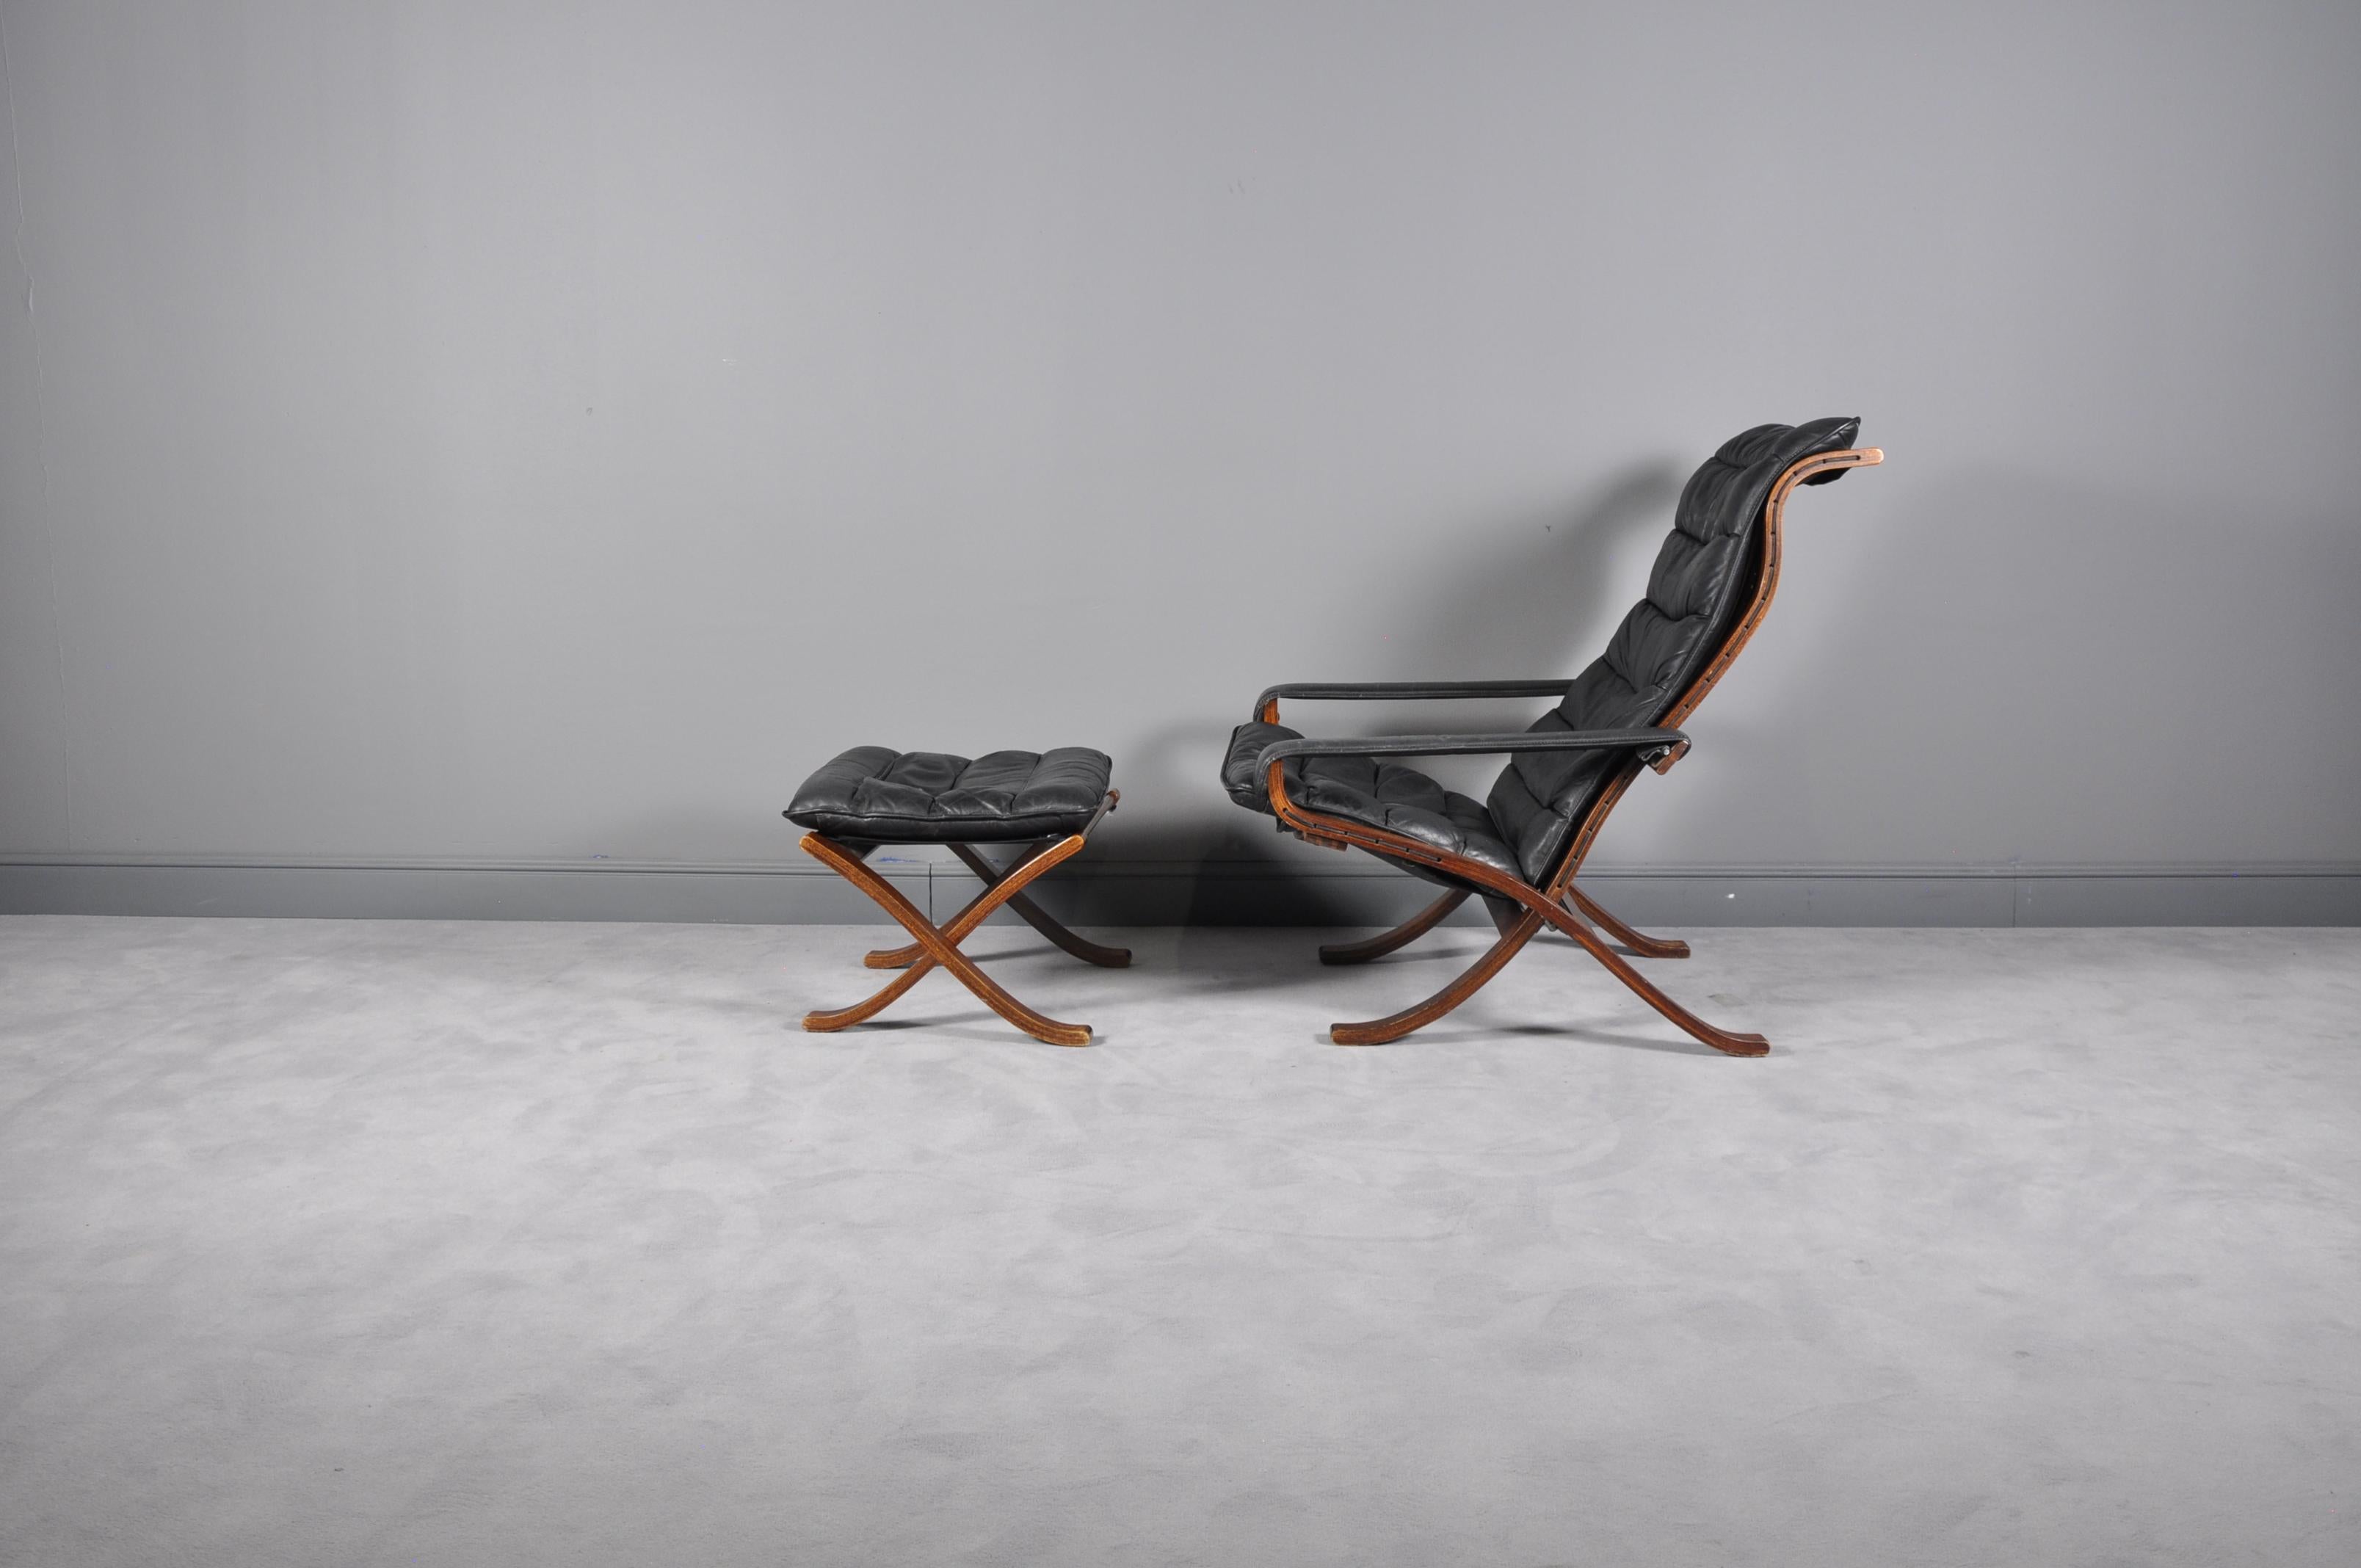 This is a model 'Flex' lounge chair and stool by Westnofa. They were designed by Ingmar Relling. They have stained dark brown wood

Stool dimensions:
- Width 60cm
- Depth 45cm
- Height 35cm

Chair dimensions:

W 75 / D 95 / H 90 cm seat H